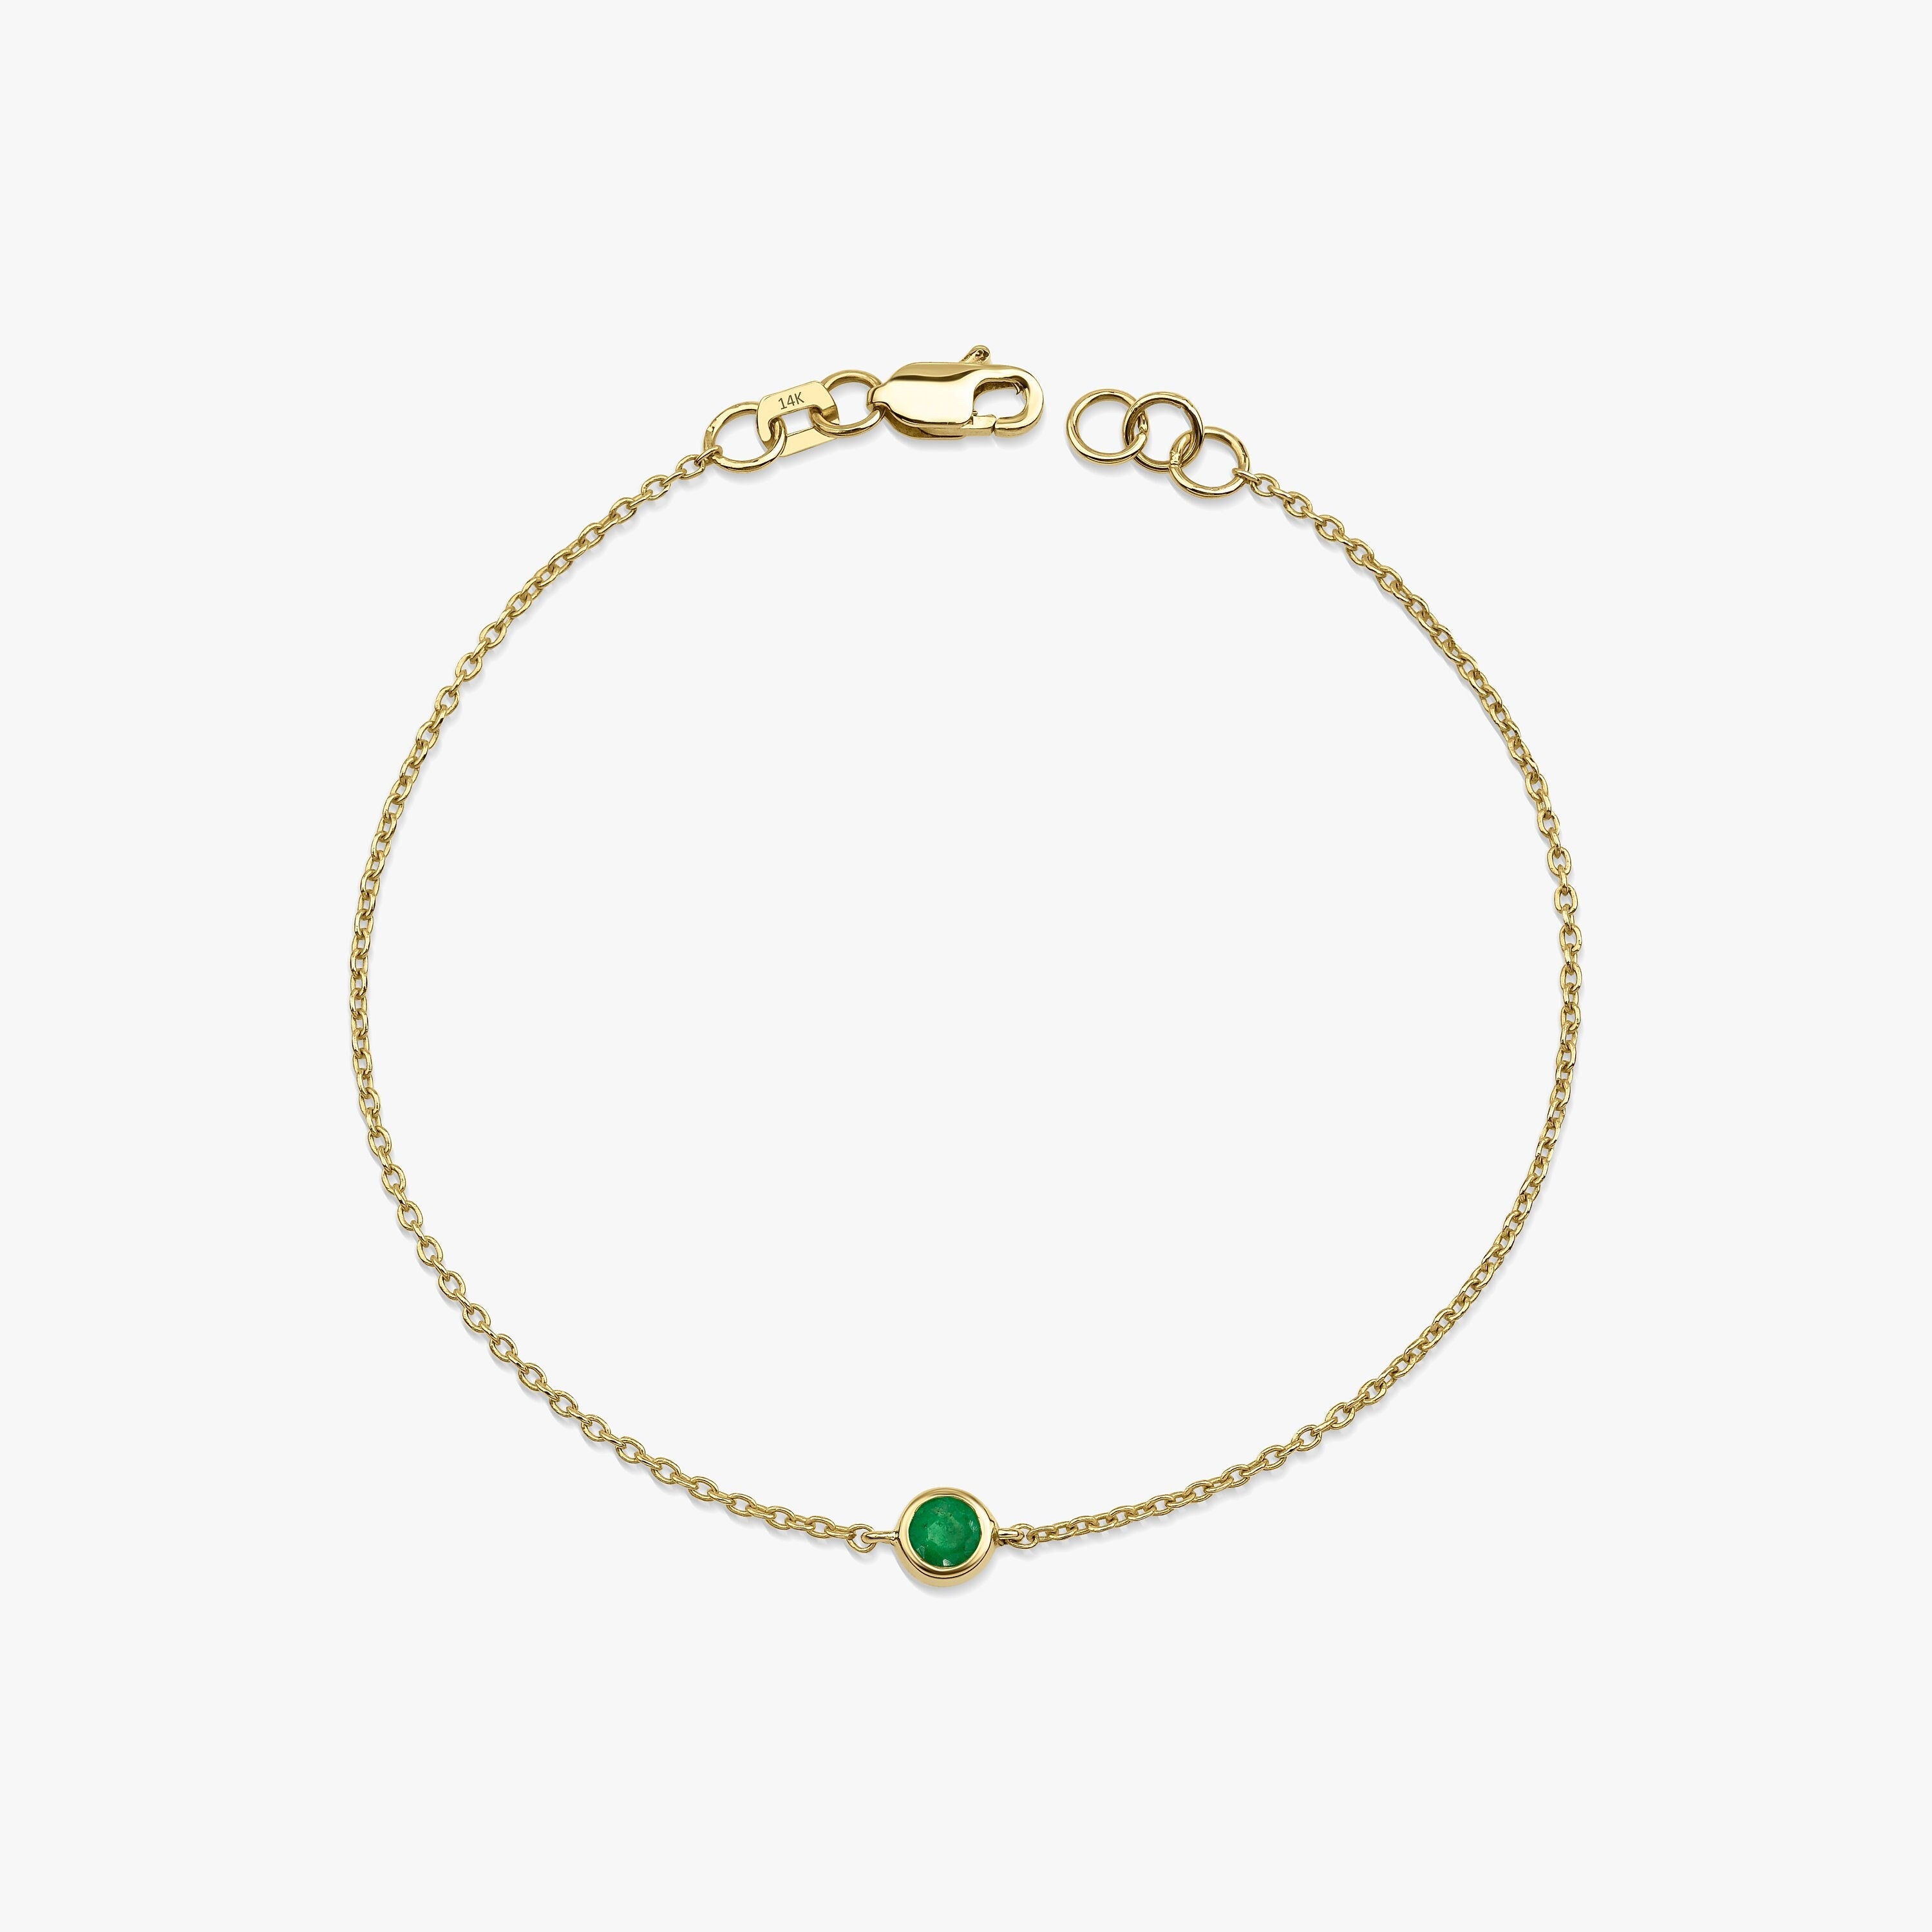 Natural Solitaire Emerald Bracelet Available in 14K and 18K Gold